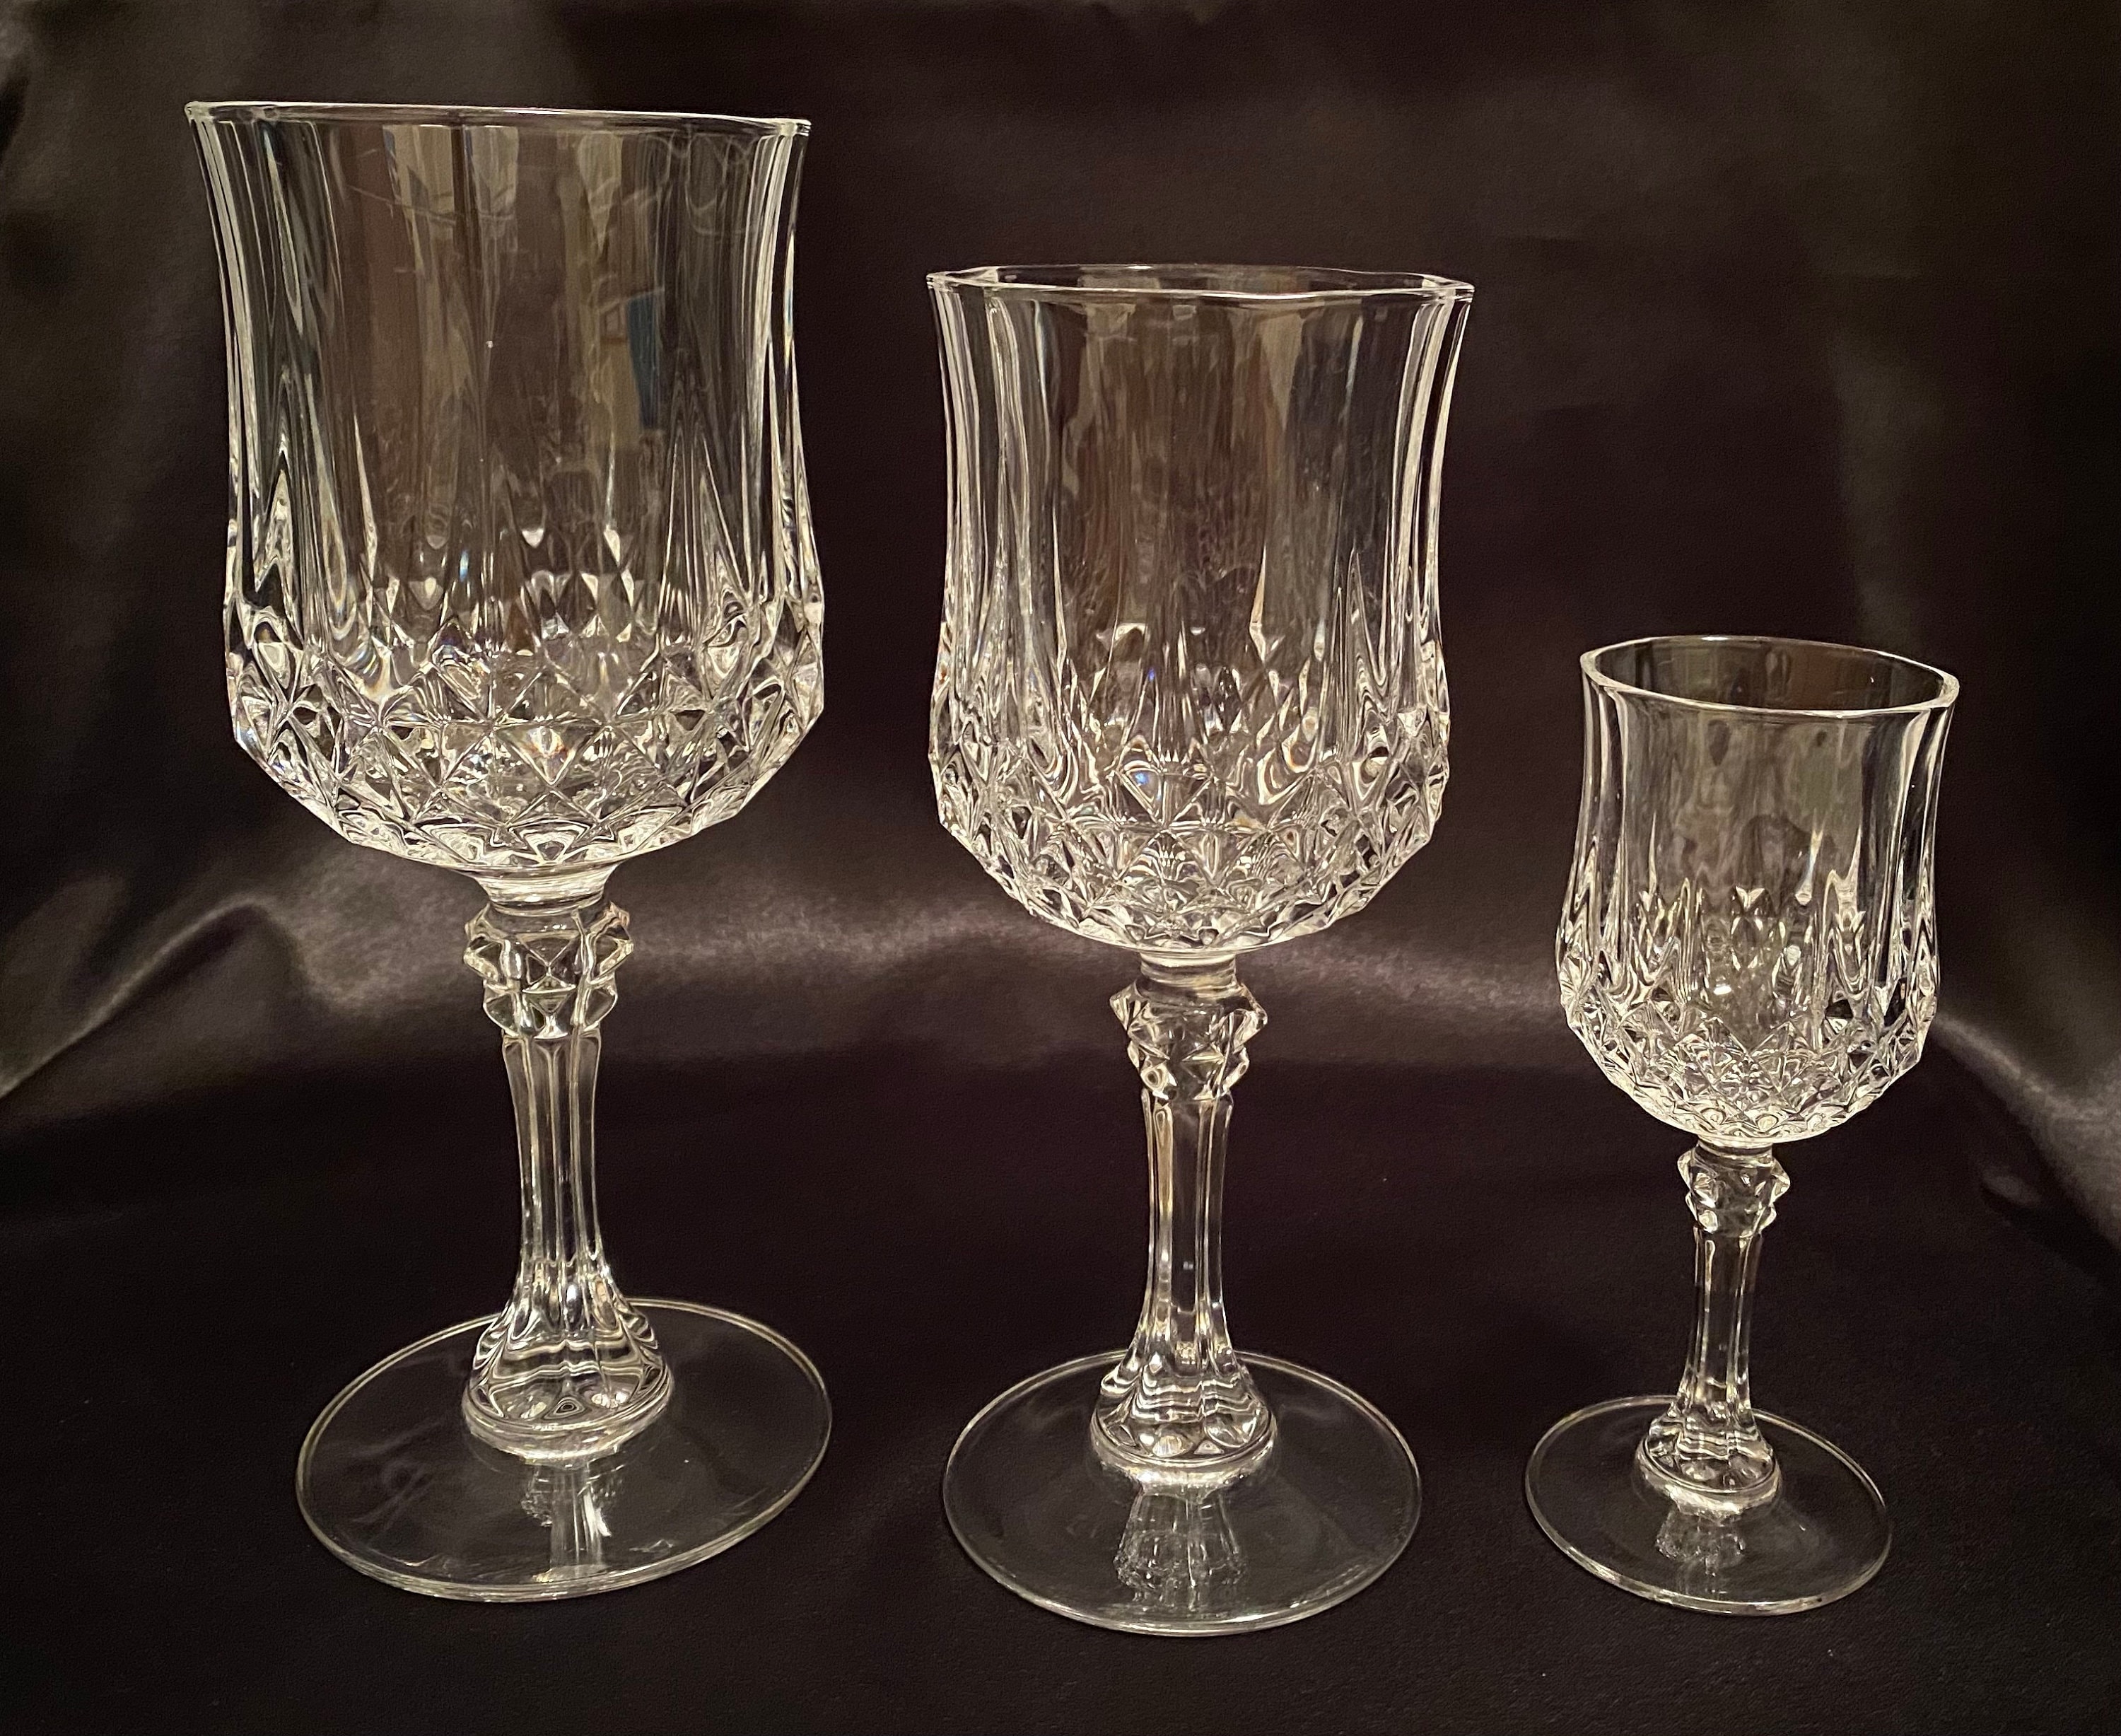 VINTAGE CRYSTAL GLASSES: Cristal D'arques Durand Longchamp Glassware  Collection Cut Crystal Stemware Several Styles Available 